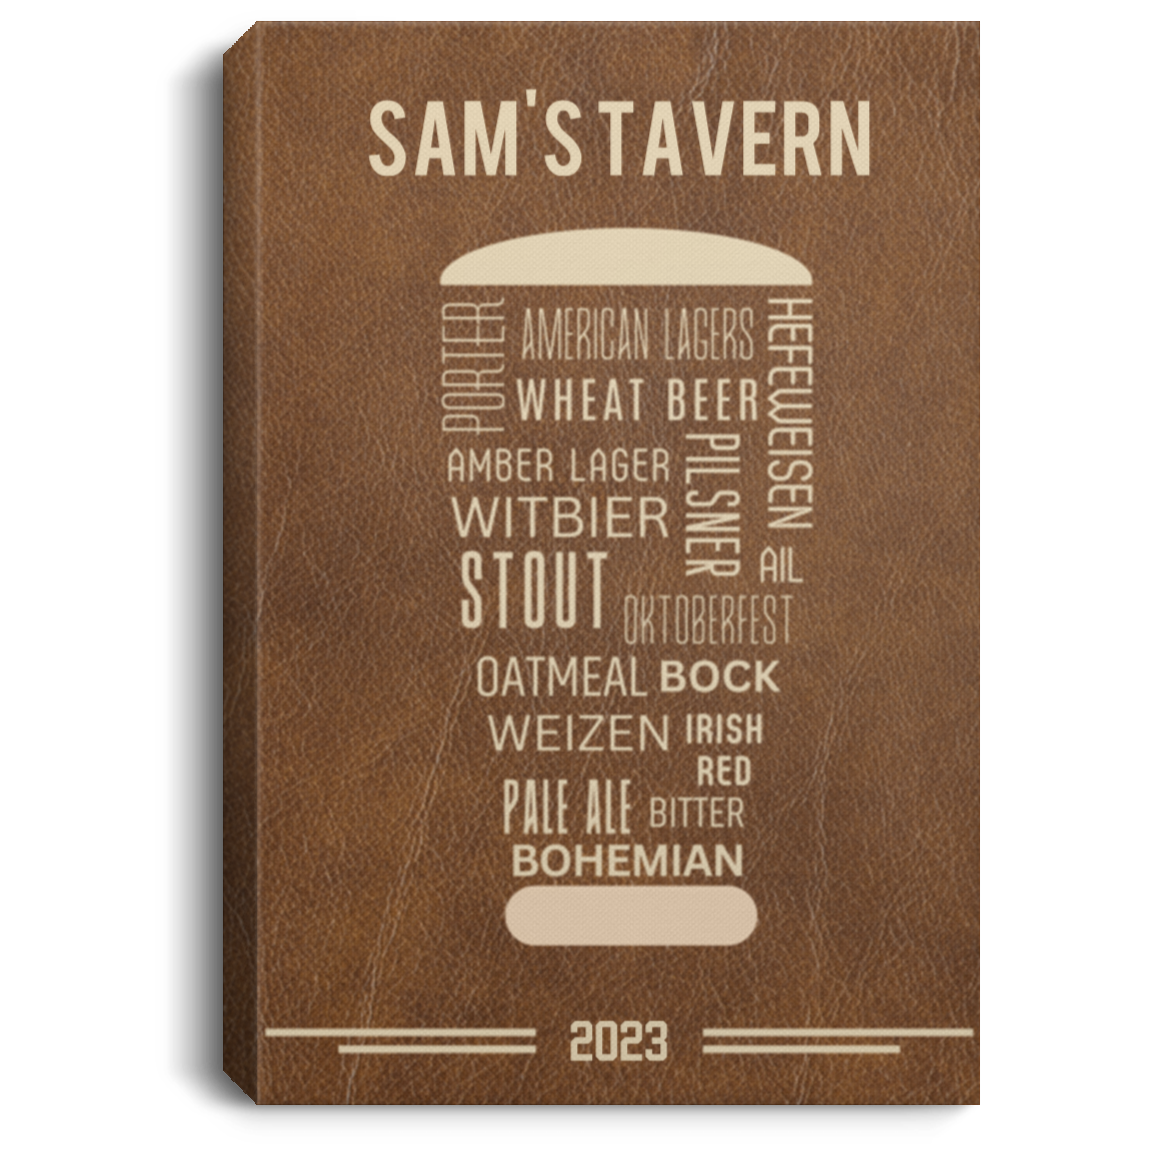 Personalized Tavern/Bar Sign